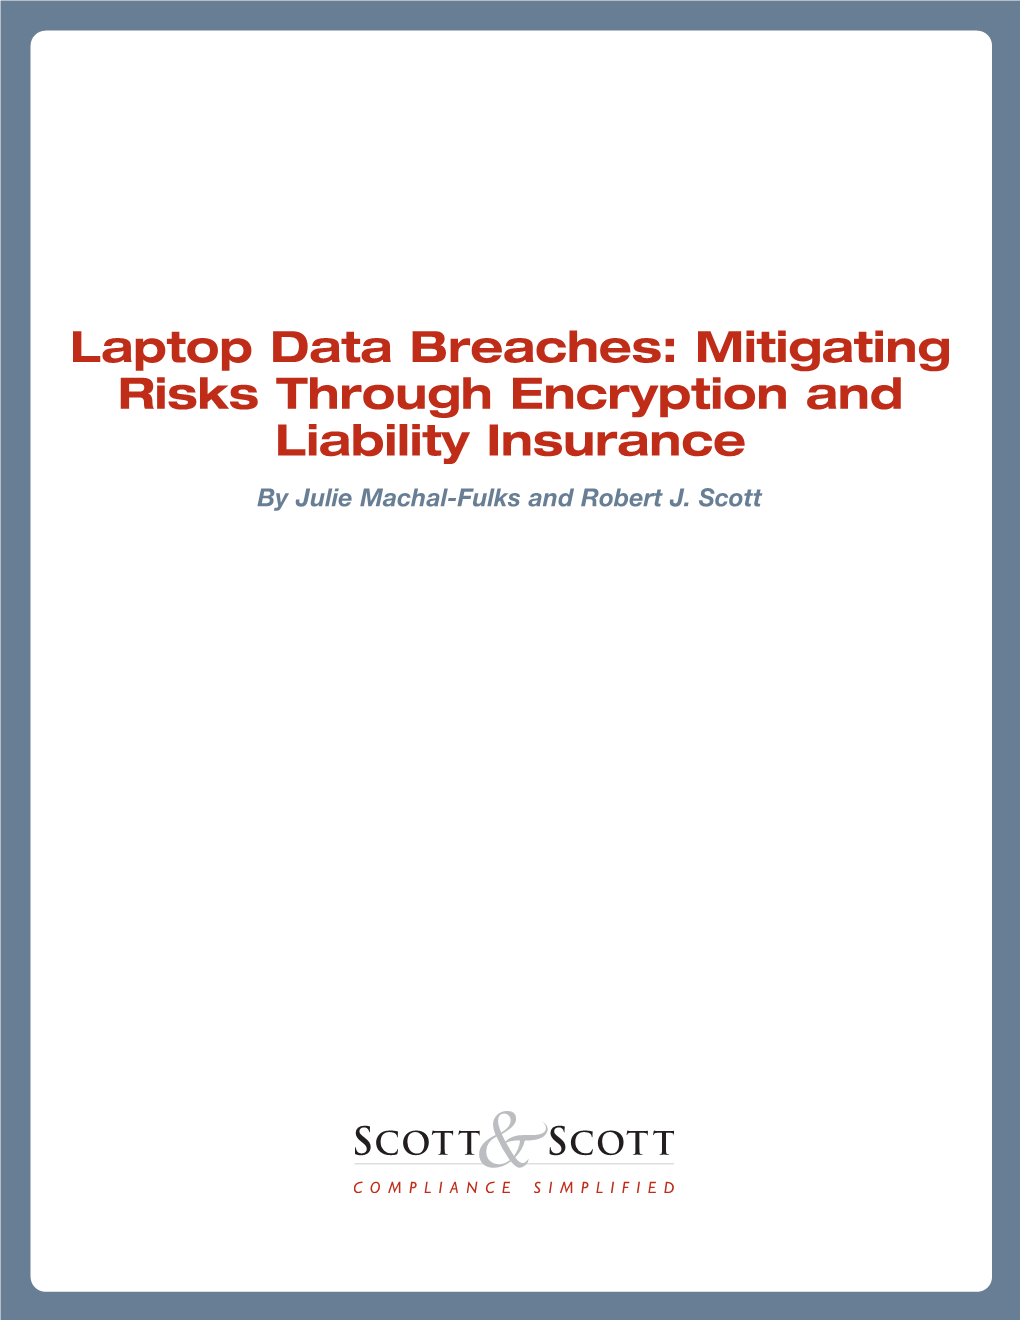 Laptop Data Breaches: Mitigating Risks Through Encryption and Liability Insurance by Julie Machal-Fulks and Robert J